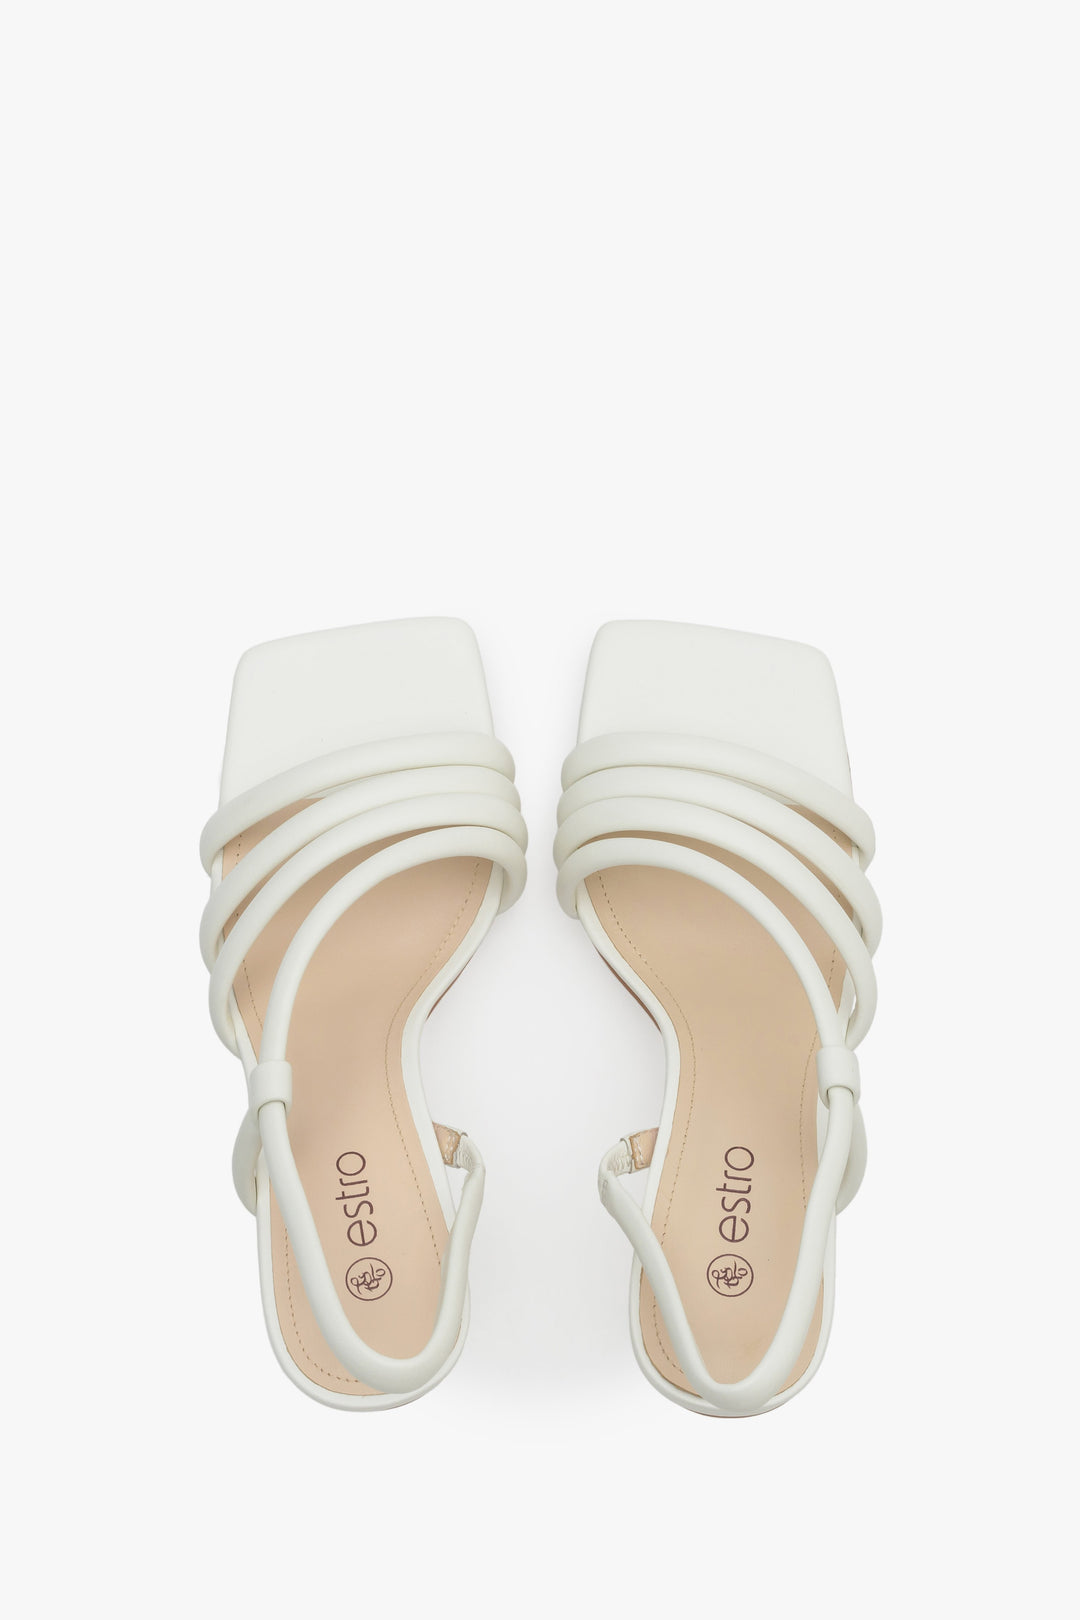 Heeled women's strappy sandals made of natural leather in light beige by Estro.